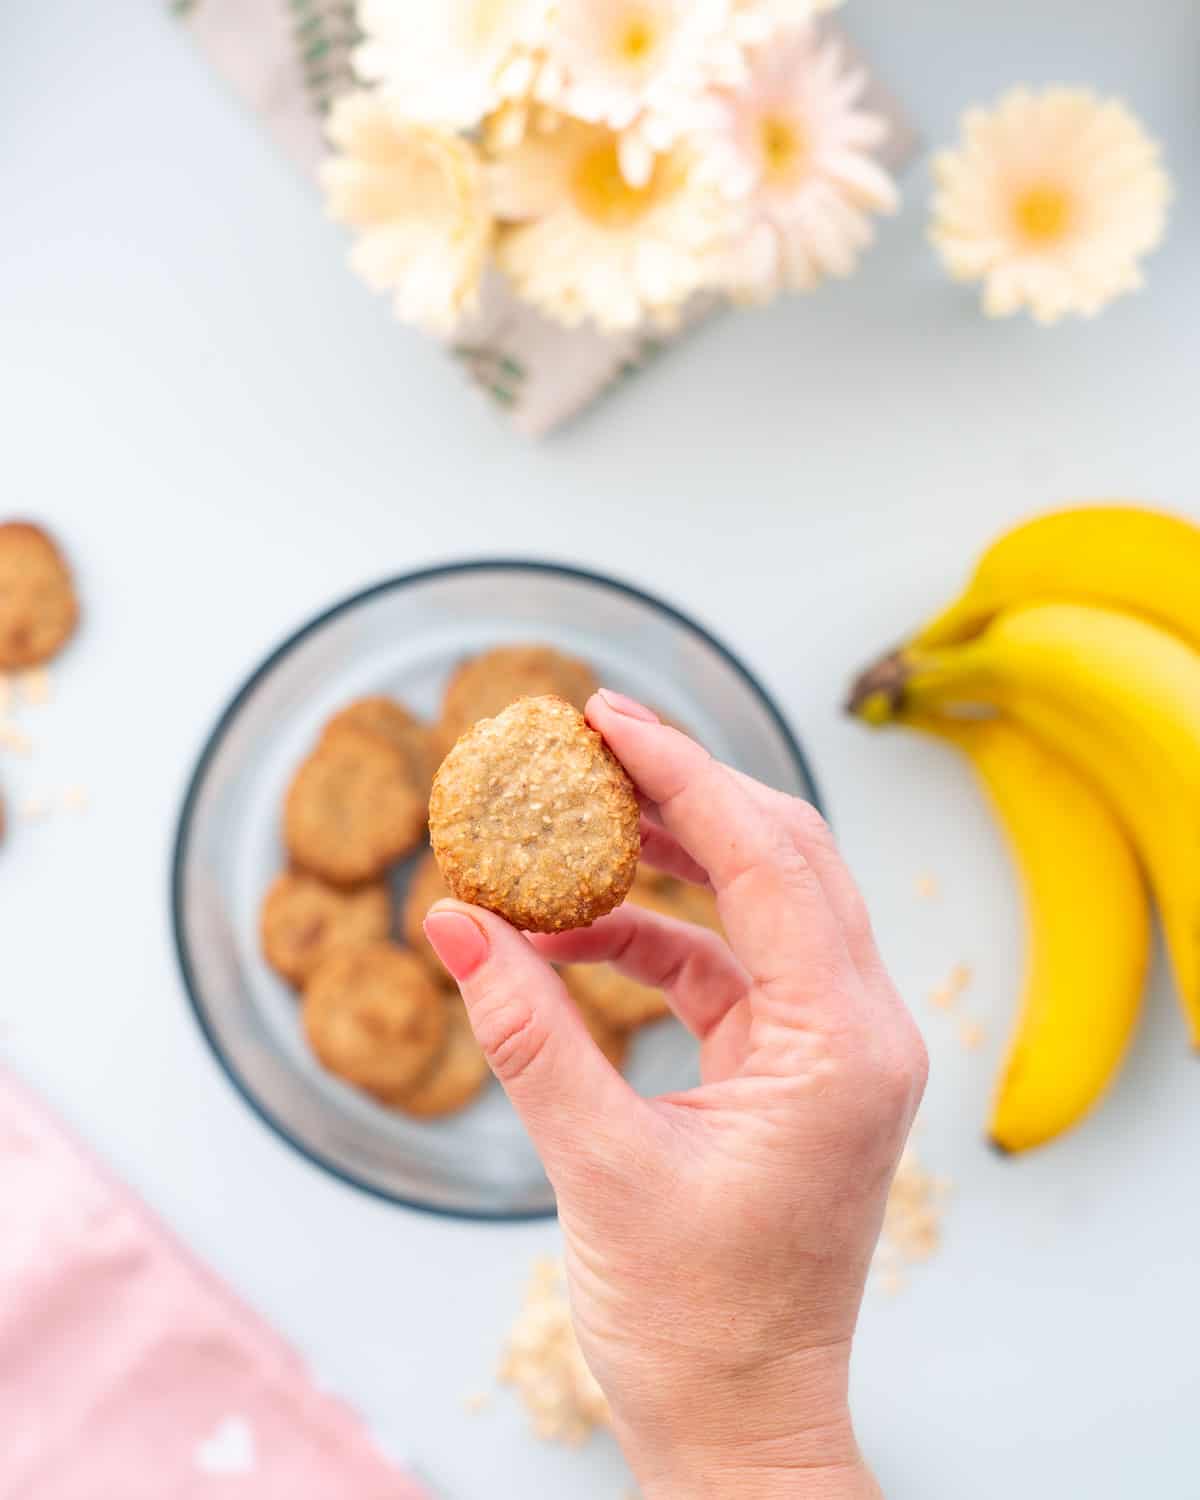 A hand holding a small cookie above a round glass container full of oatmeal cookies on a bench next to a bunch of bananas.